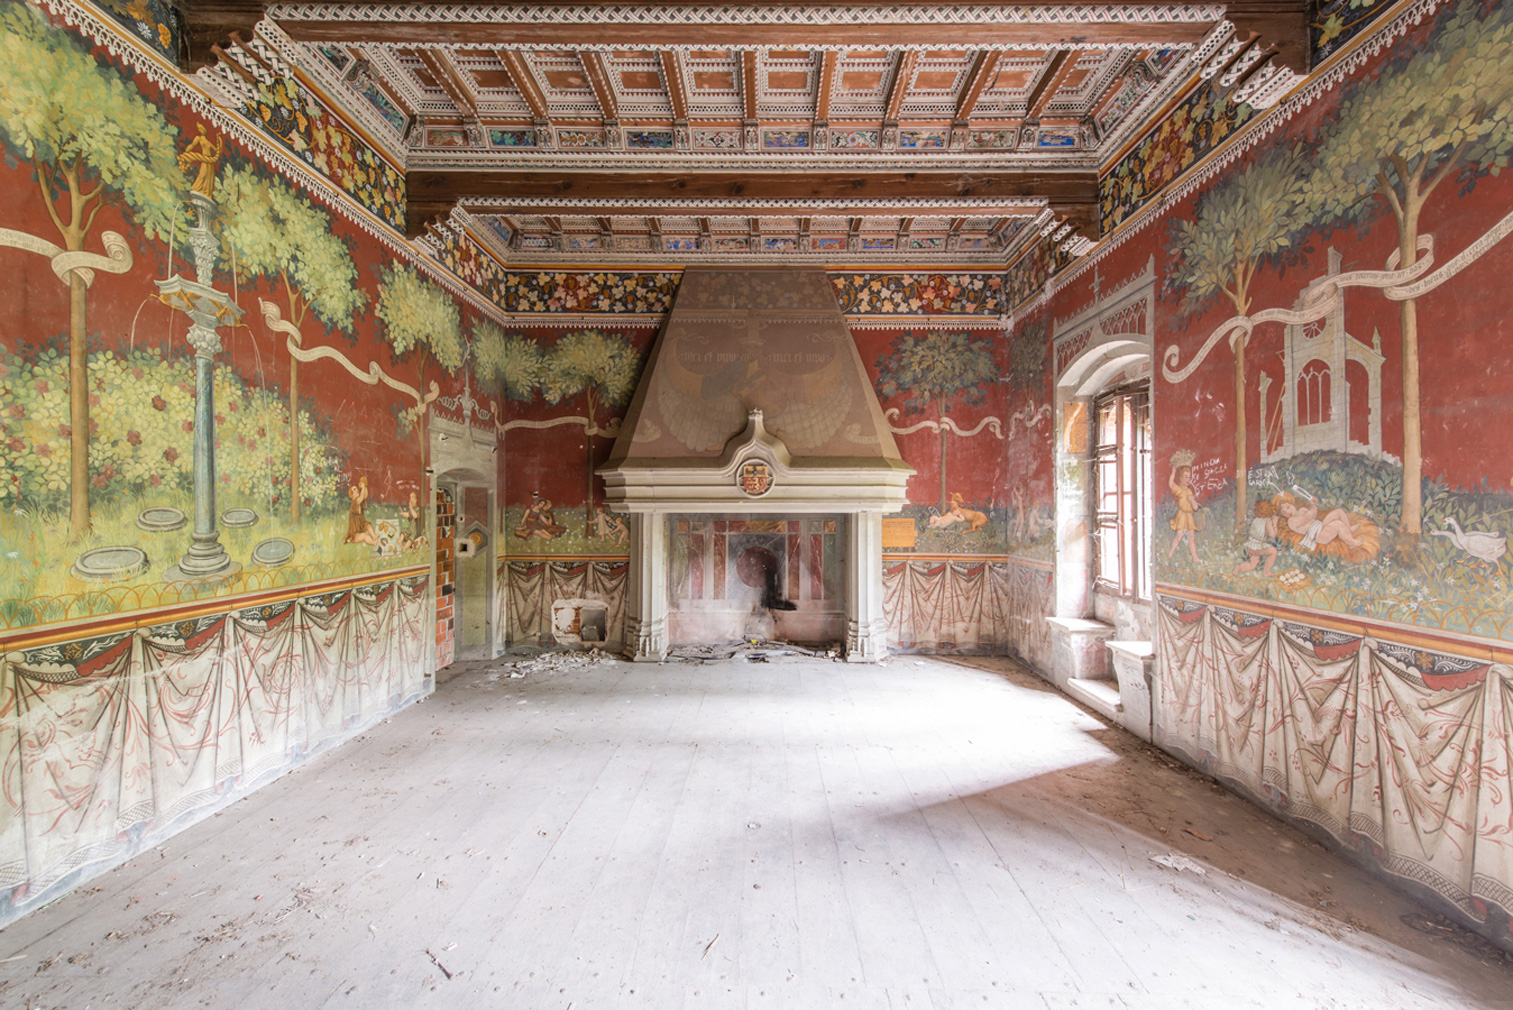 Europe’s ghostly frescos star in Romain Veillon’s 'Le Musee Imaginaire' series